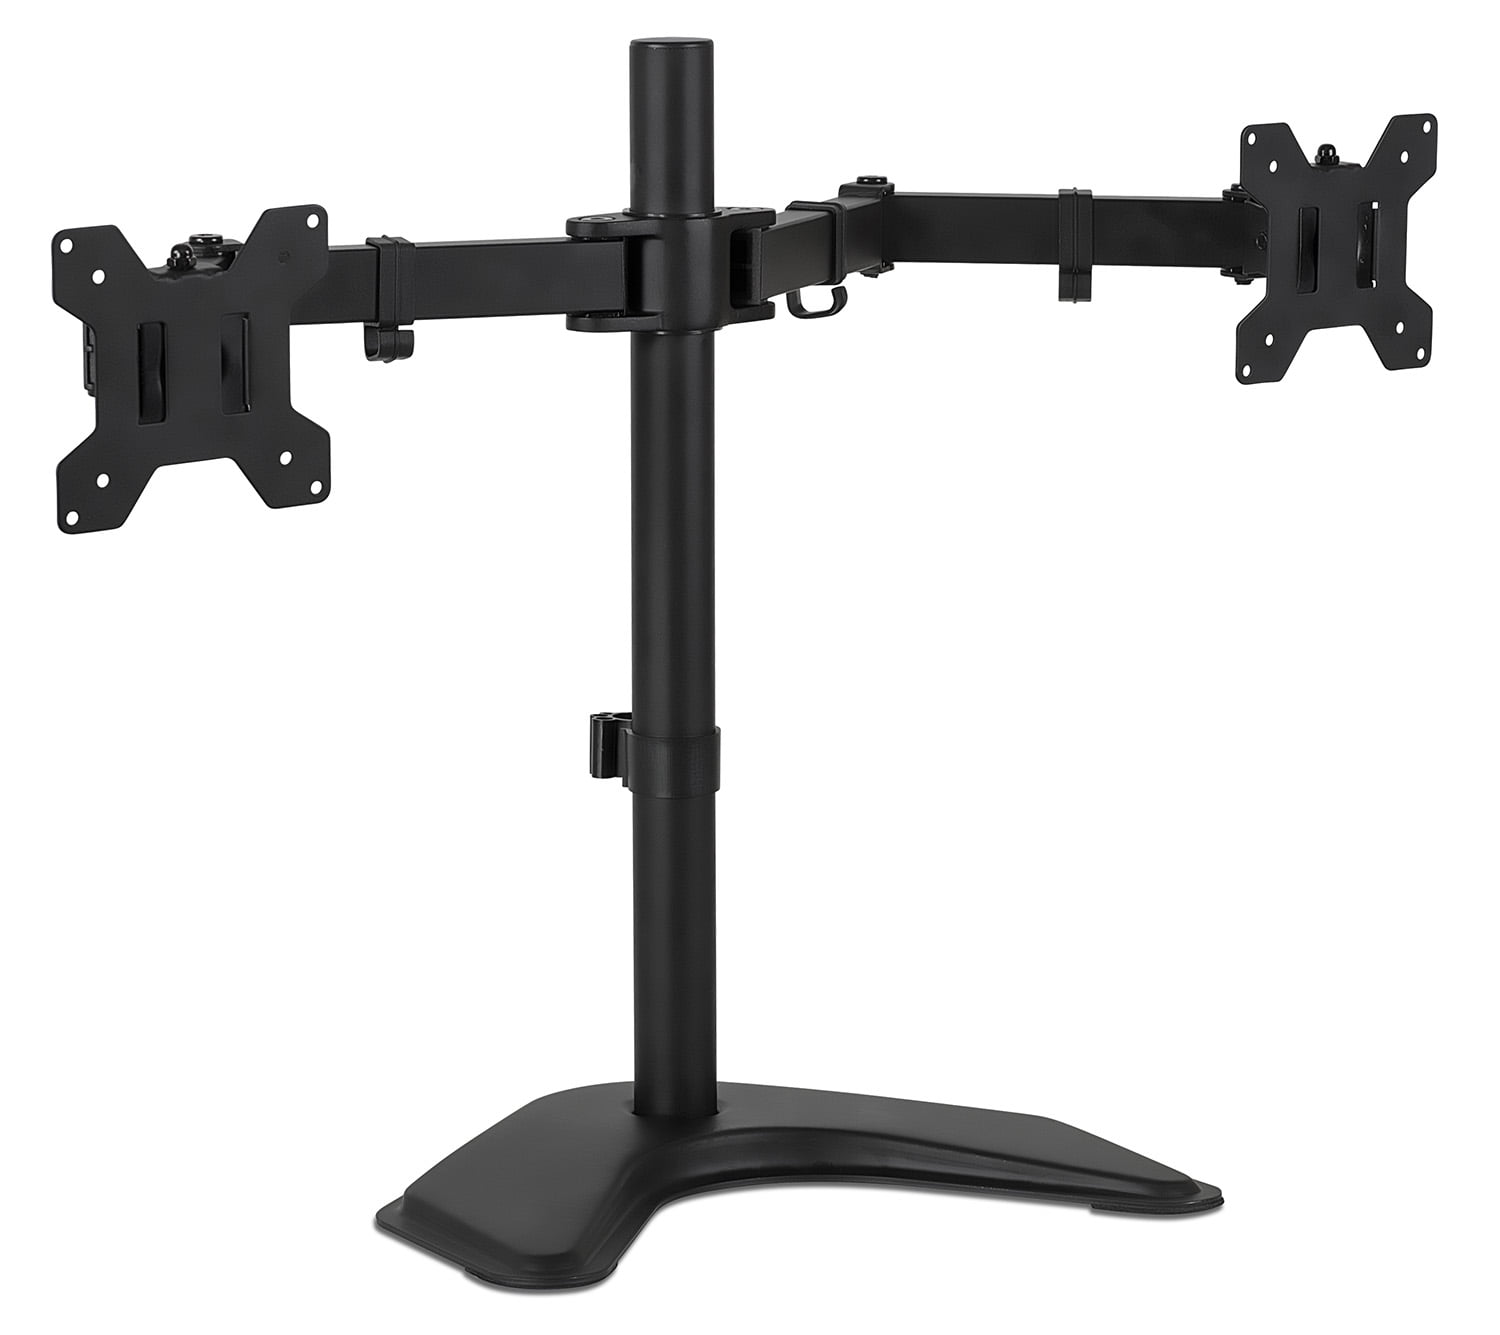 33lbs PEAL Free Standing Dual TV LCD Monitor Desk Mount Fit Two 2 Screens 27'' 